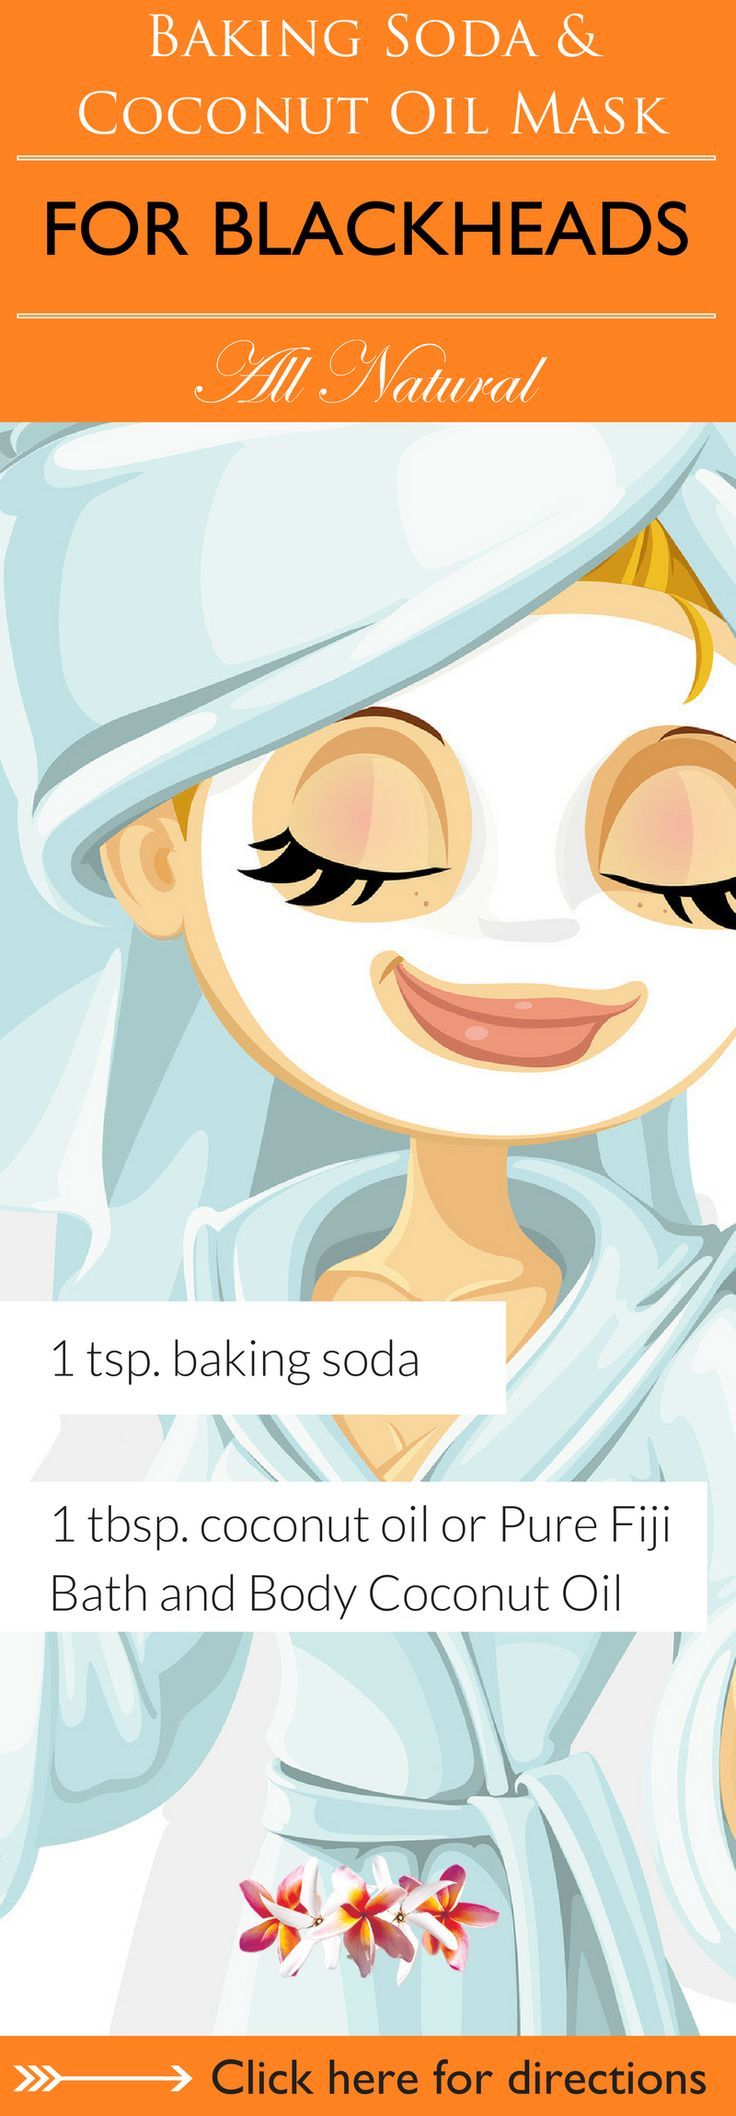 Baking Soda and Coconut Oil Mask For Blackheads Recipe | This face mask acts lik...